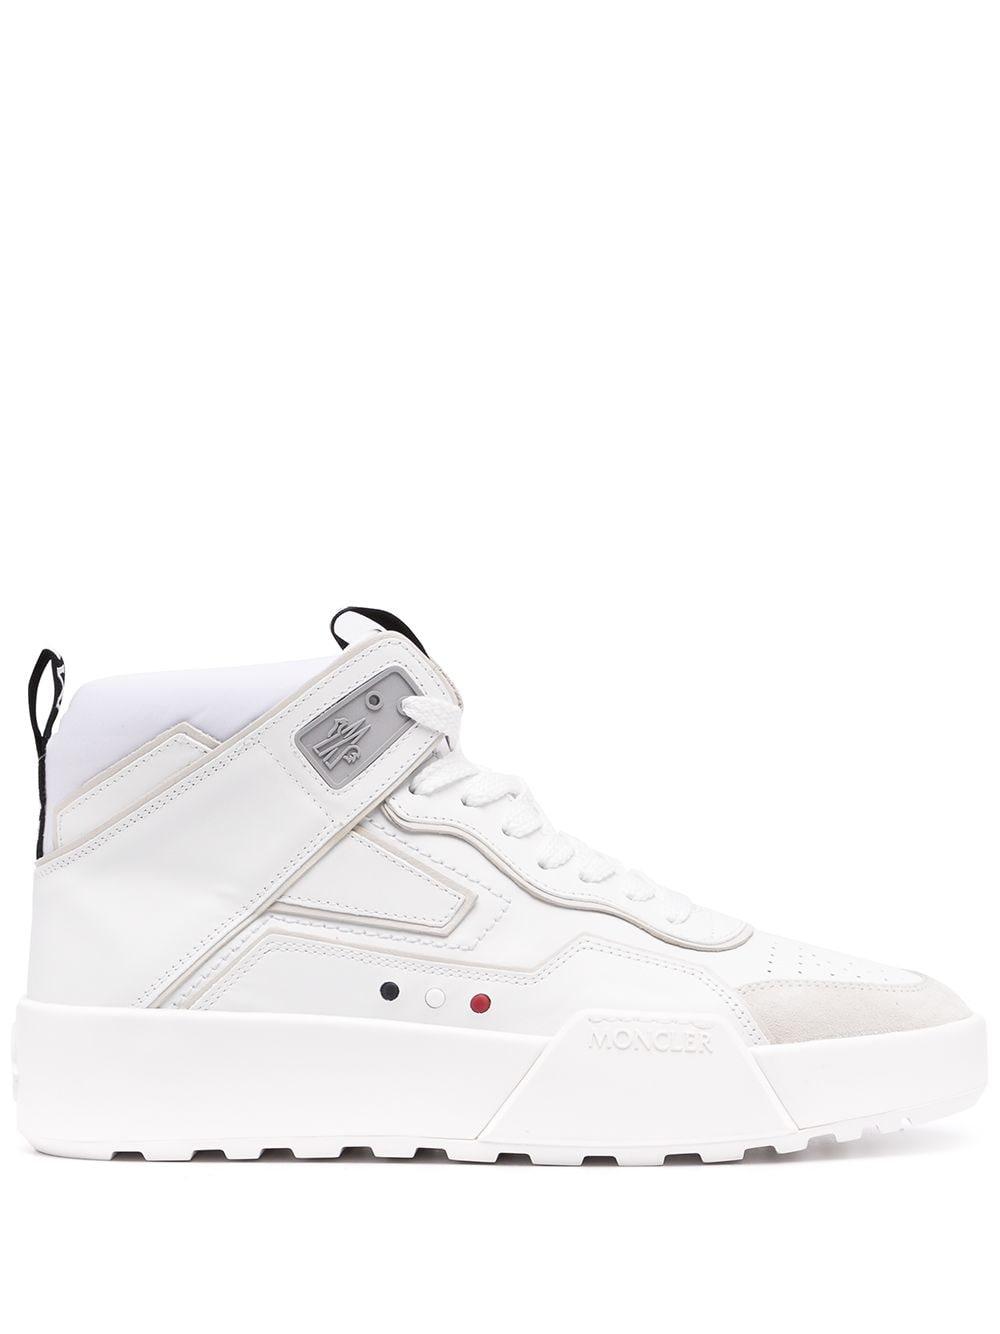 Moncler Promyx Space High Sneakers in White for Men - Lyst